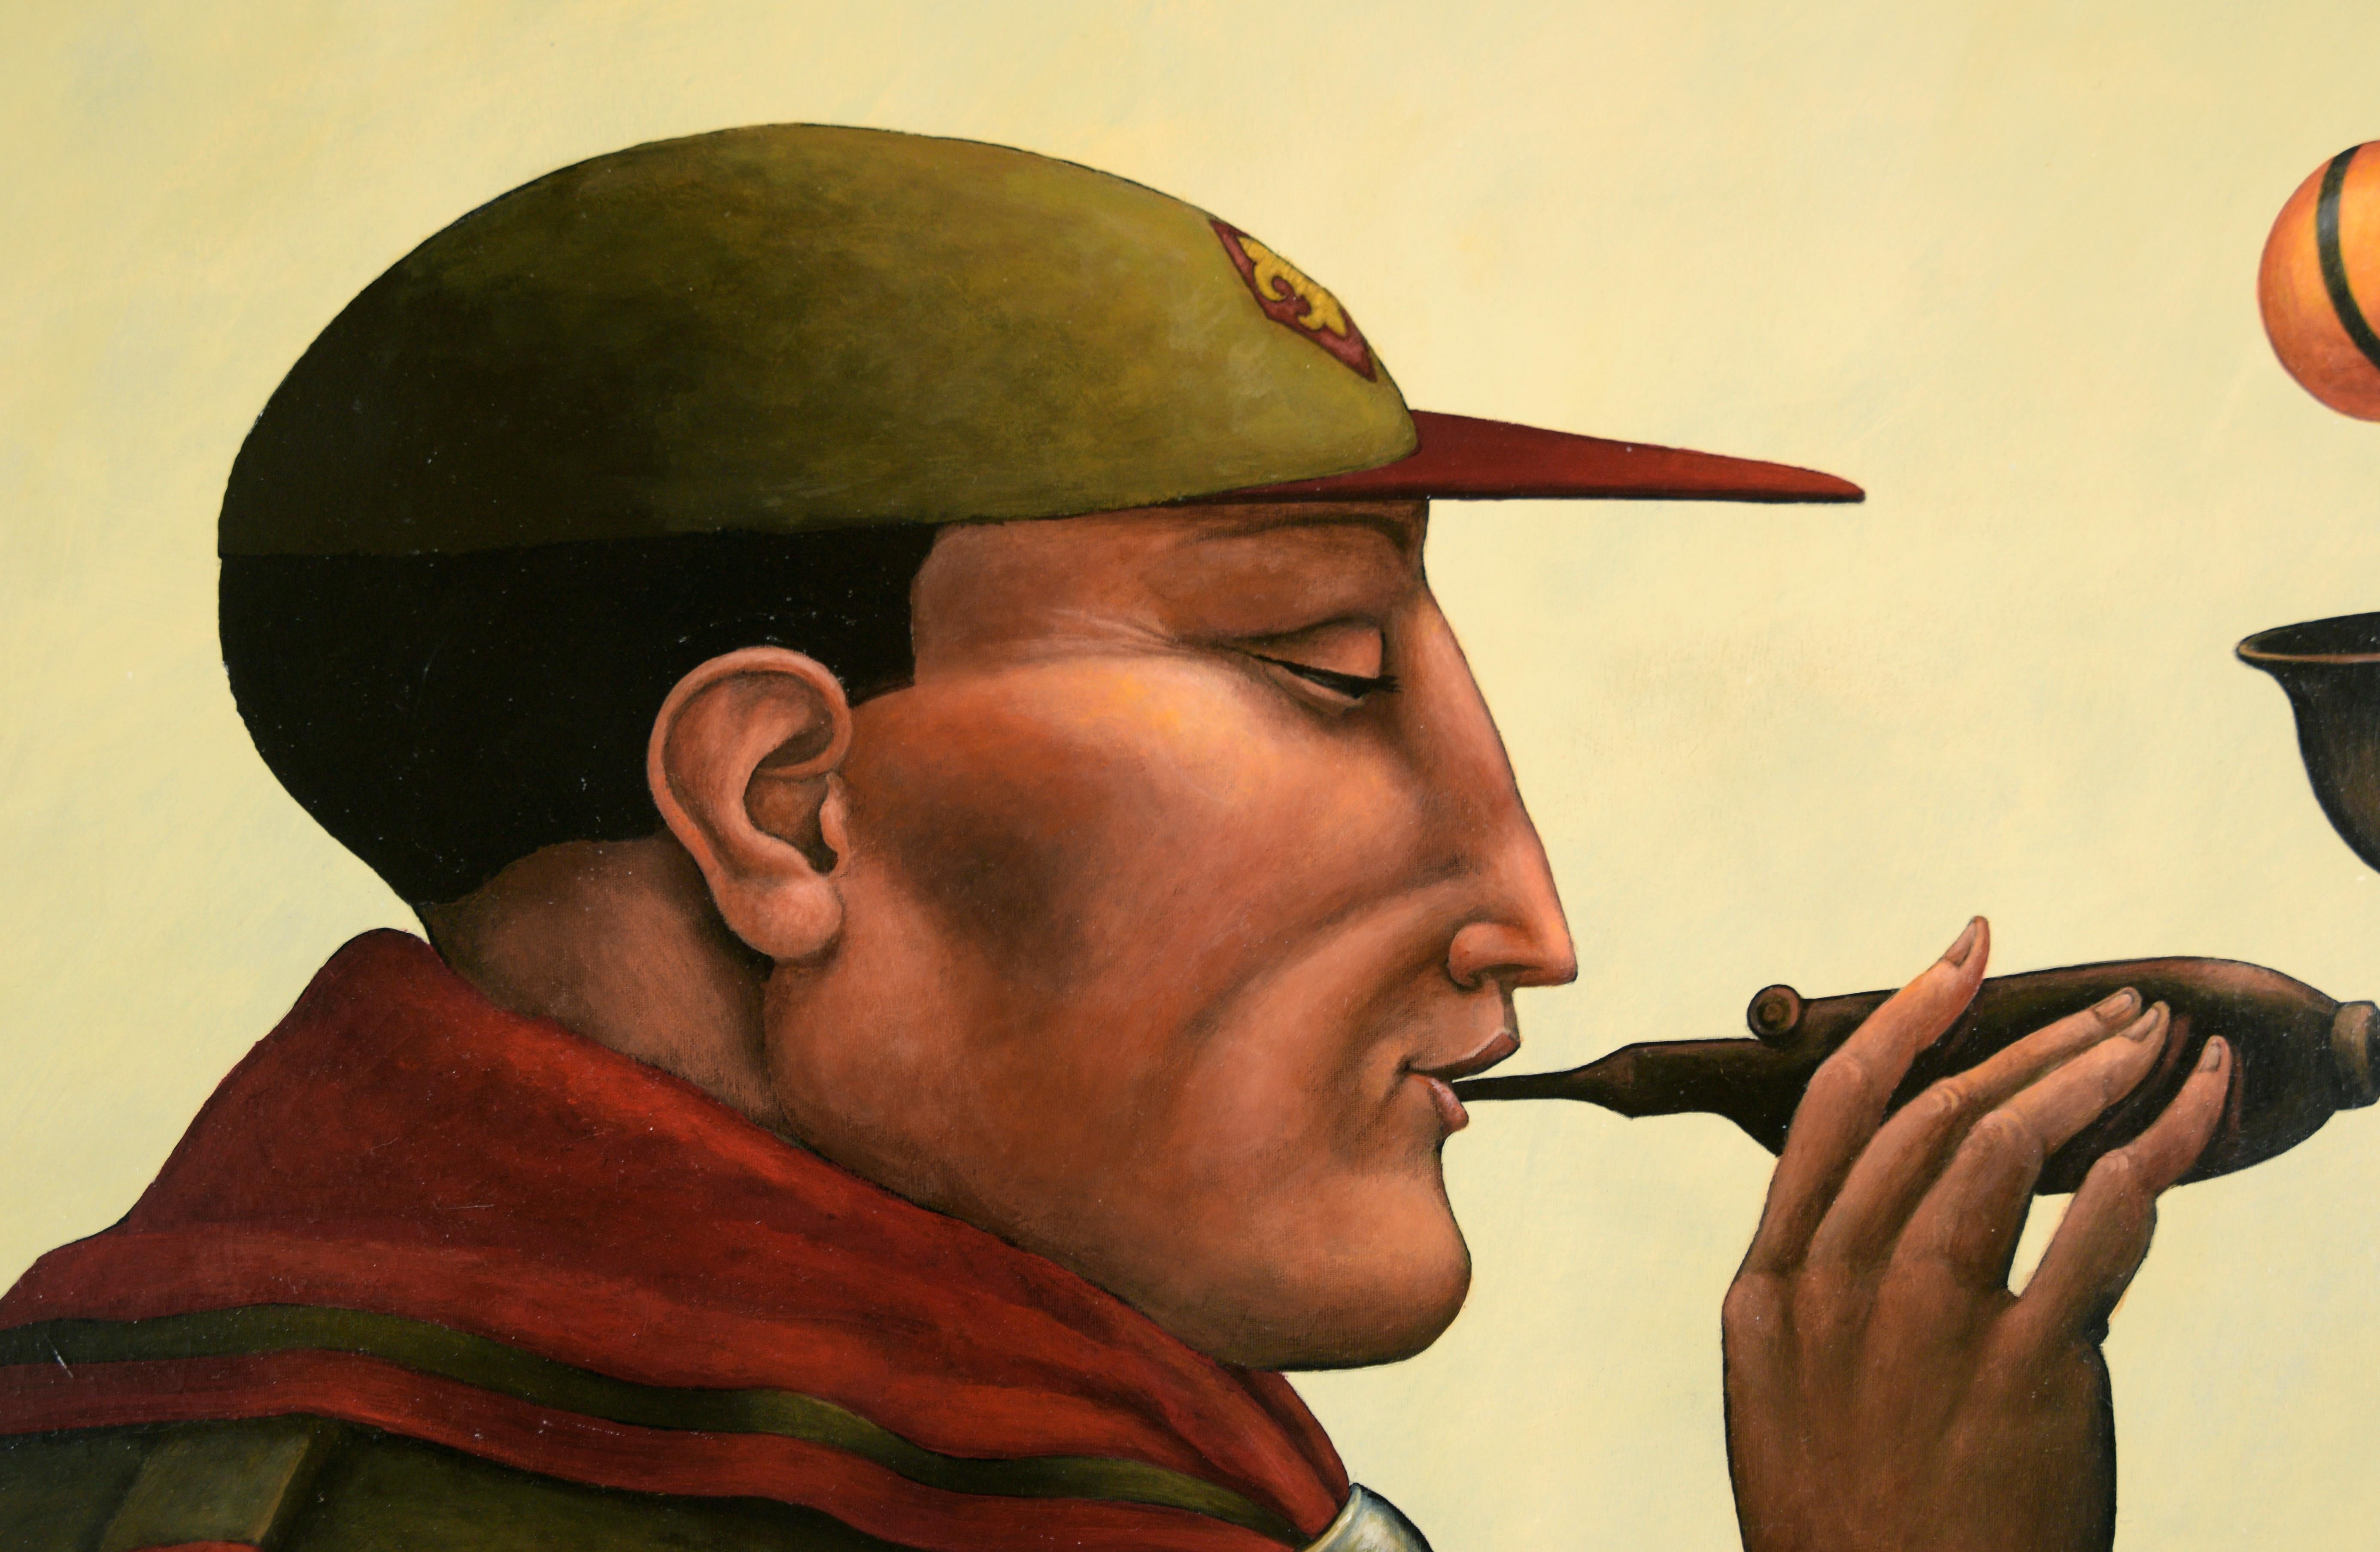 Boy Scout with a Pipe and Billiard Ball: Surrealist Portrait in Oil on Polyester - Painting by Robert Peluce